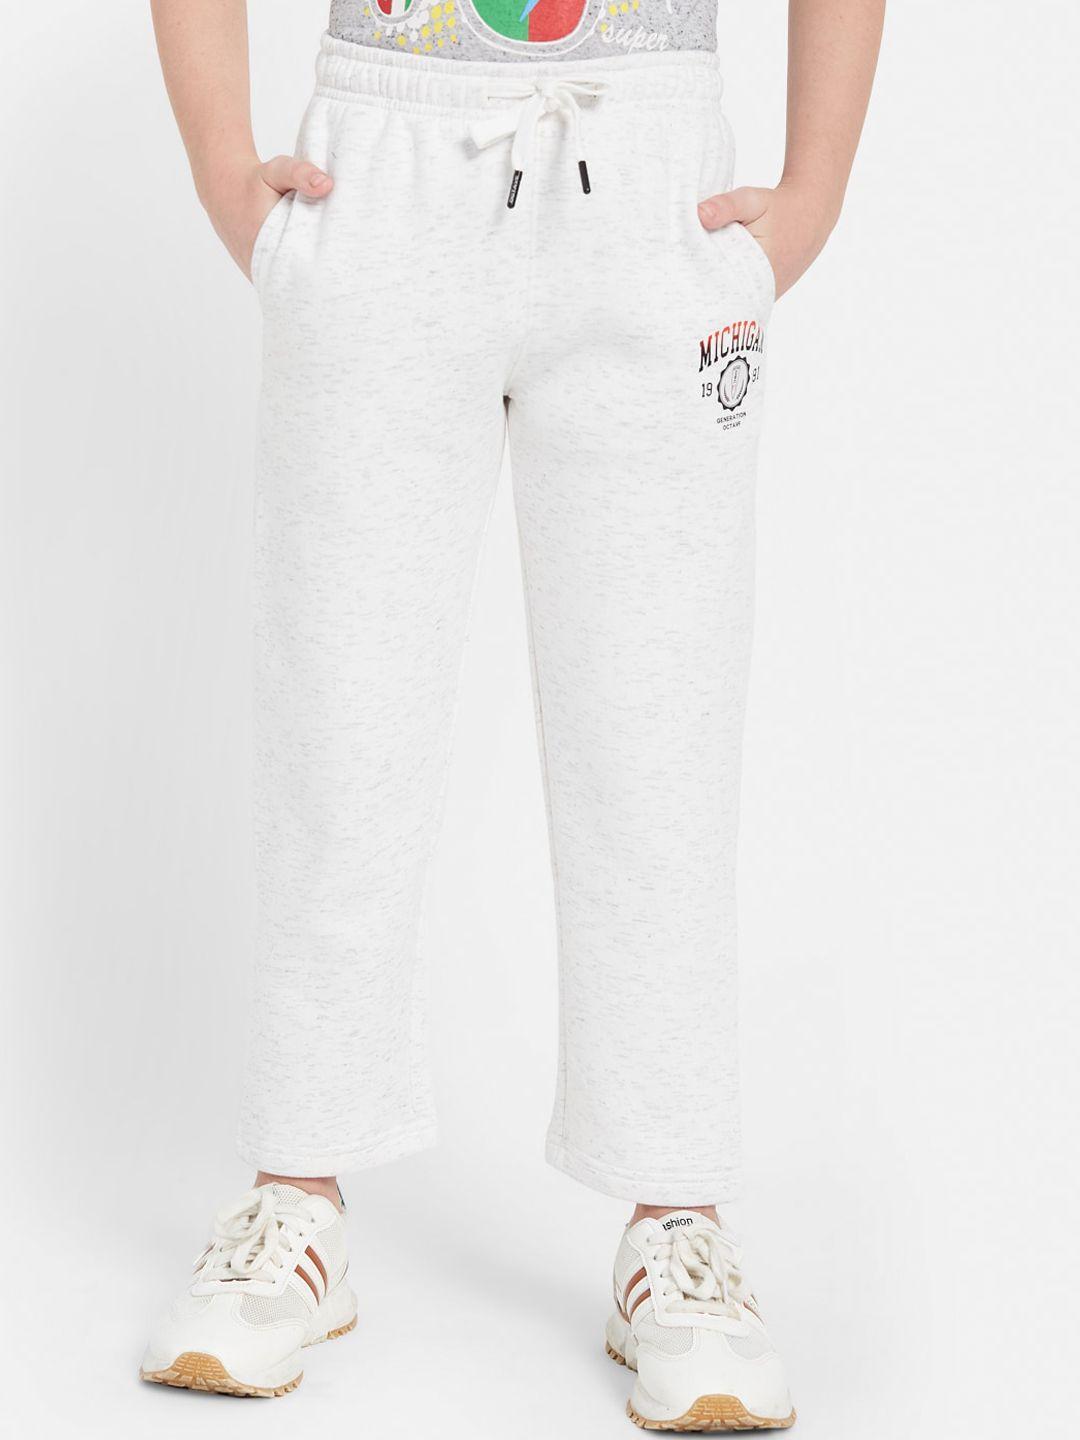 octave boys printed cotton track pants